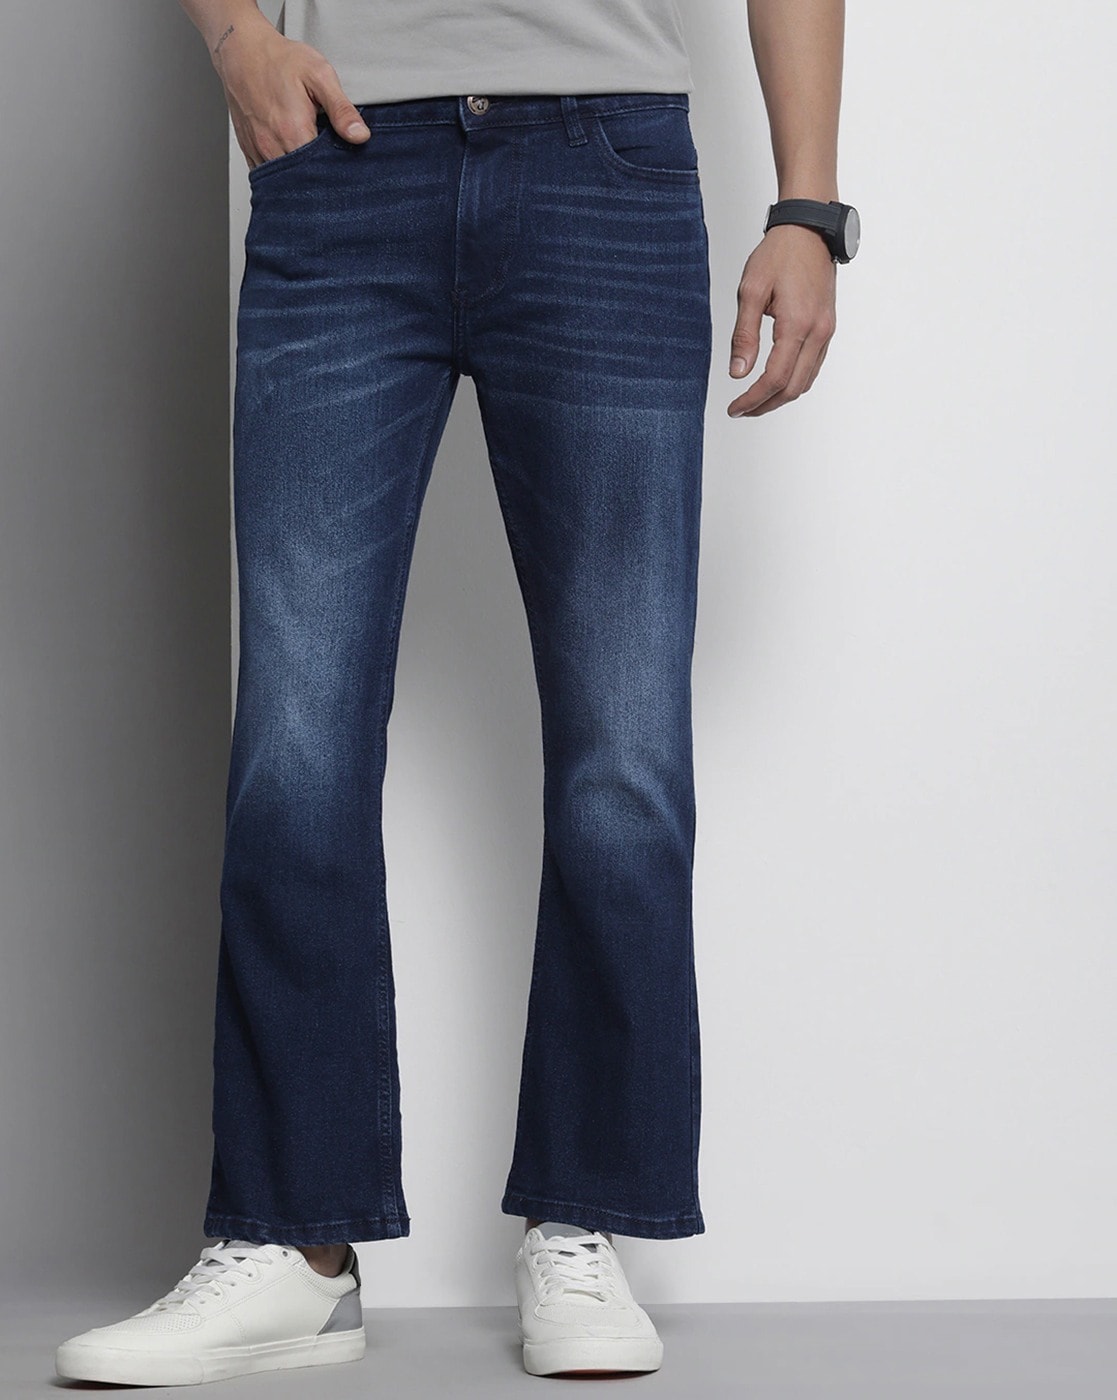 Buy Blue Jeans for The Indian Garage Co Online |